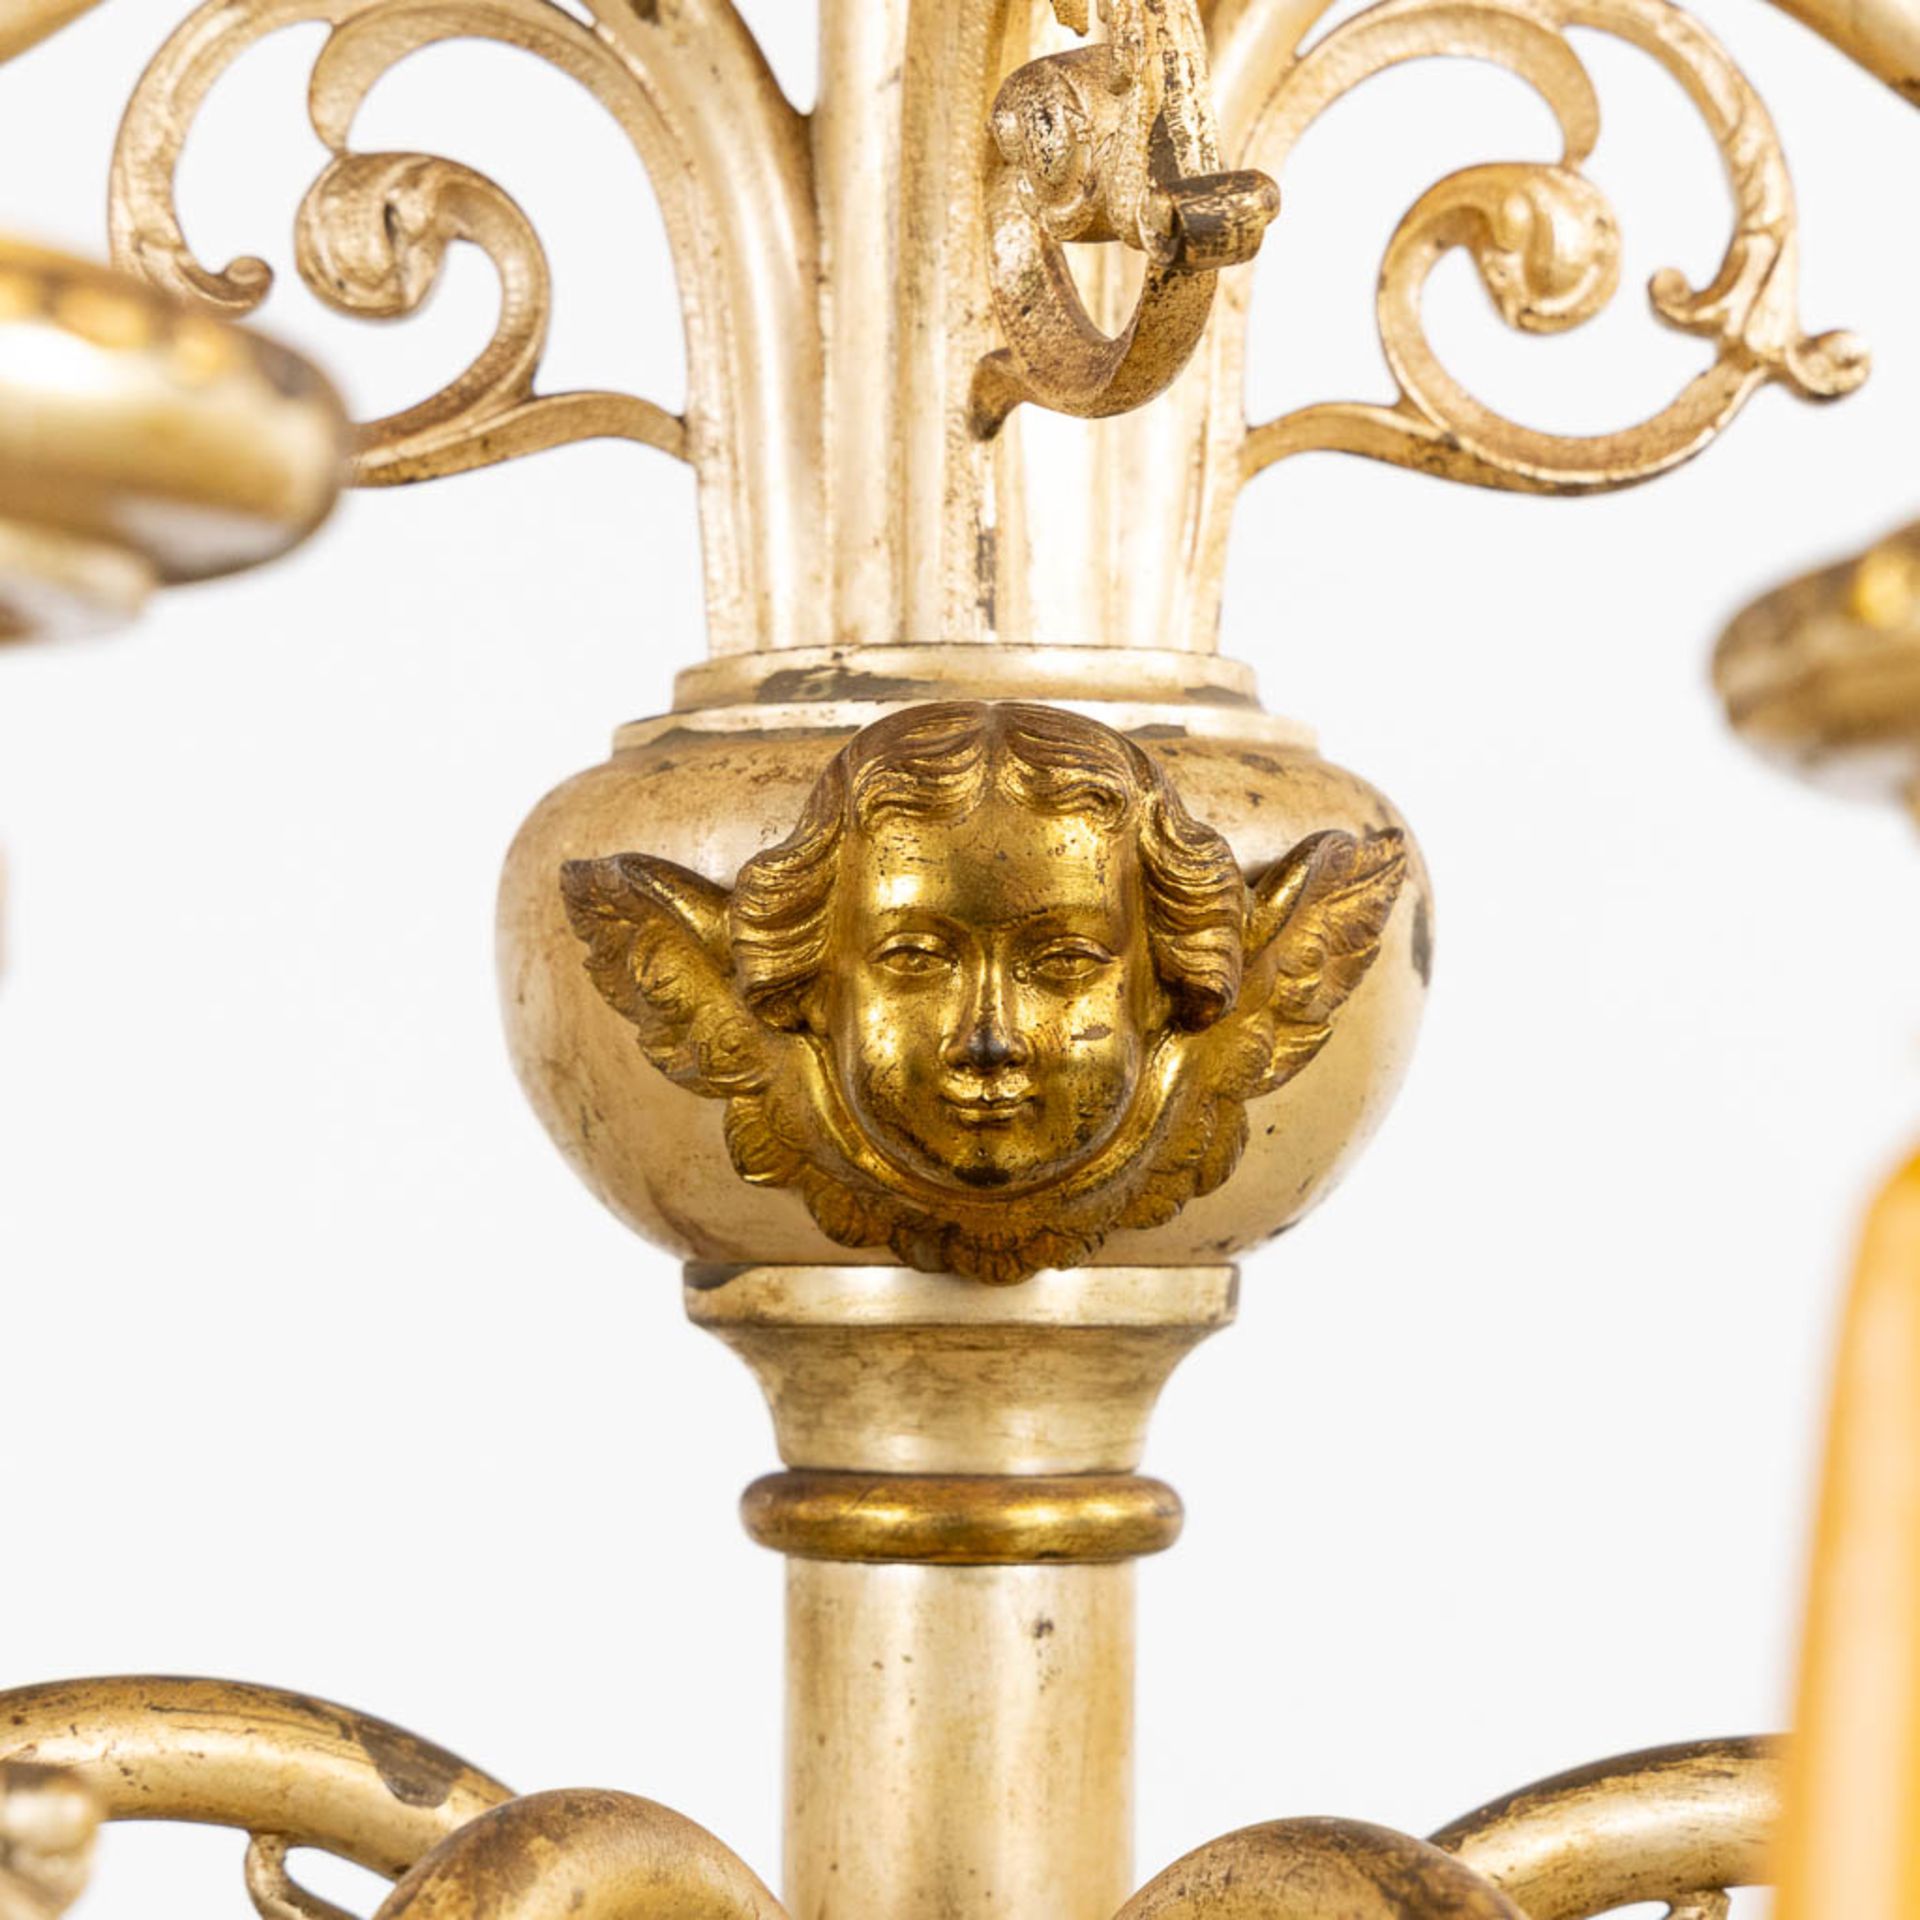 An impressive pair of candelabra, 15 candles, gold and silver-plated metal. (L:44 x W:60 x H:138 cm) - Image 12 of 12